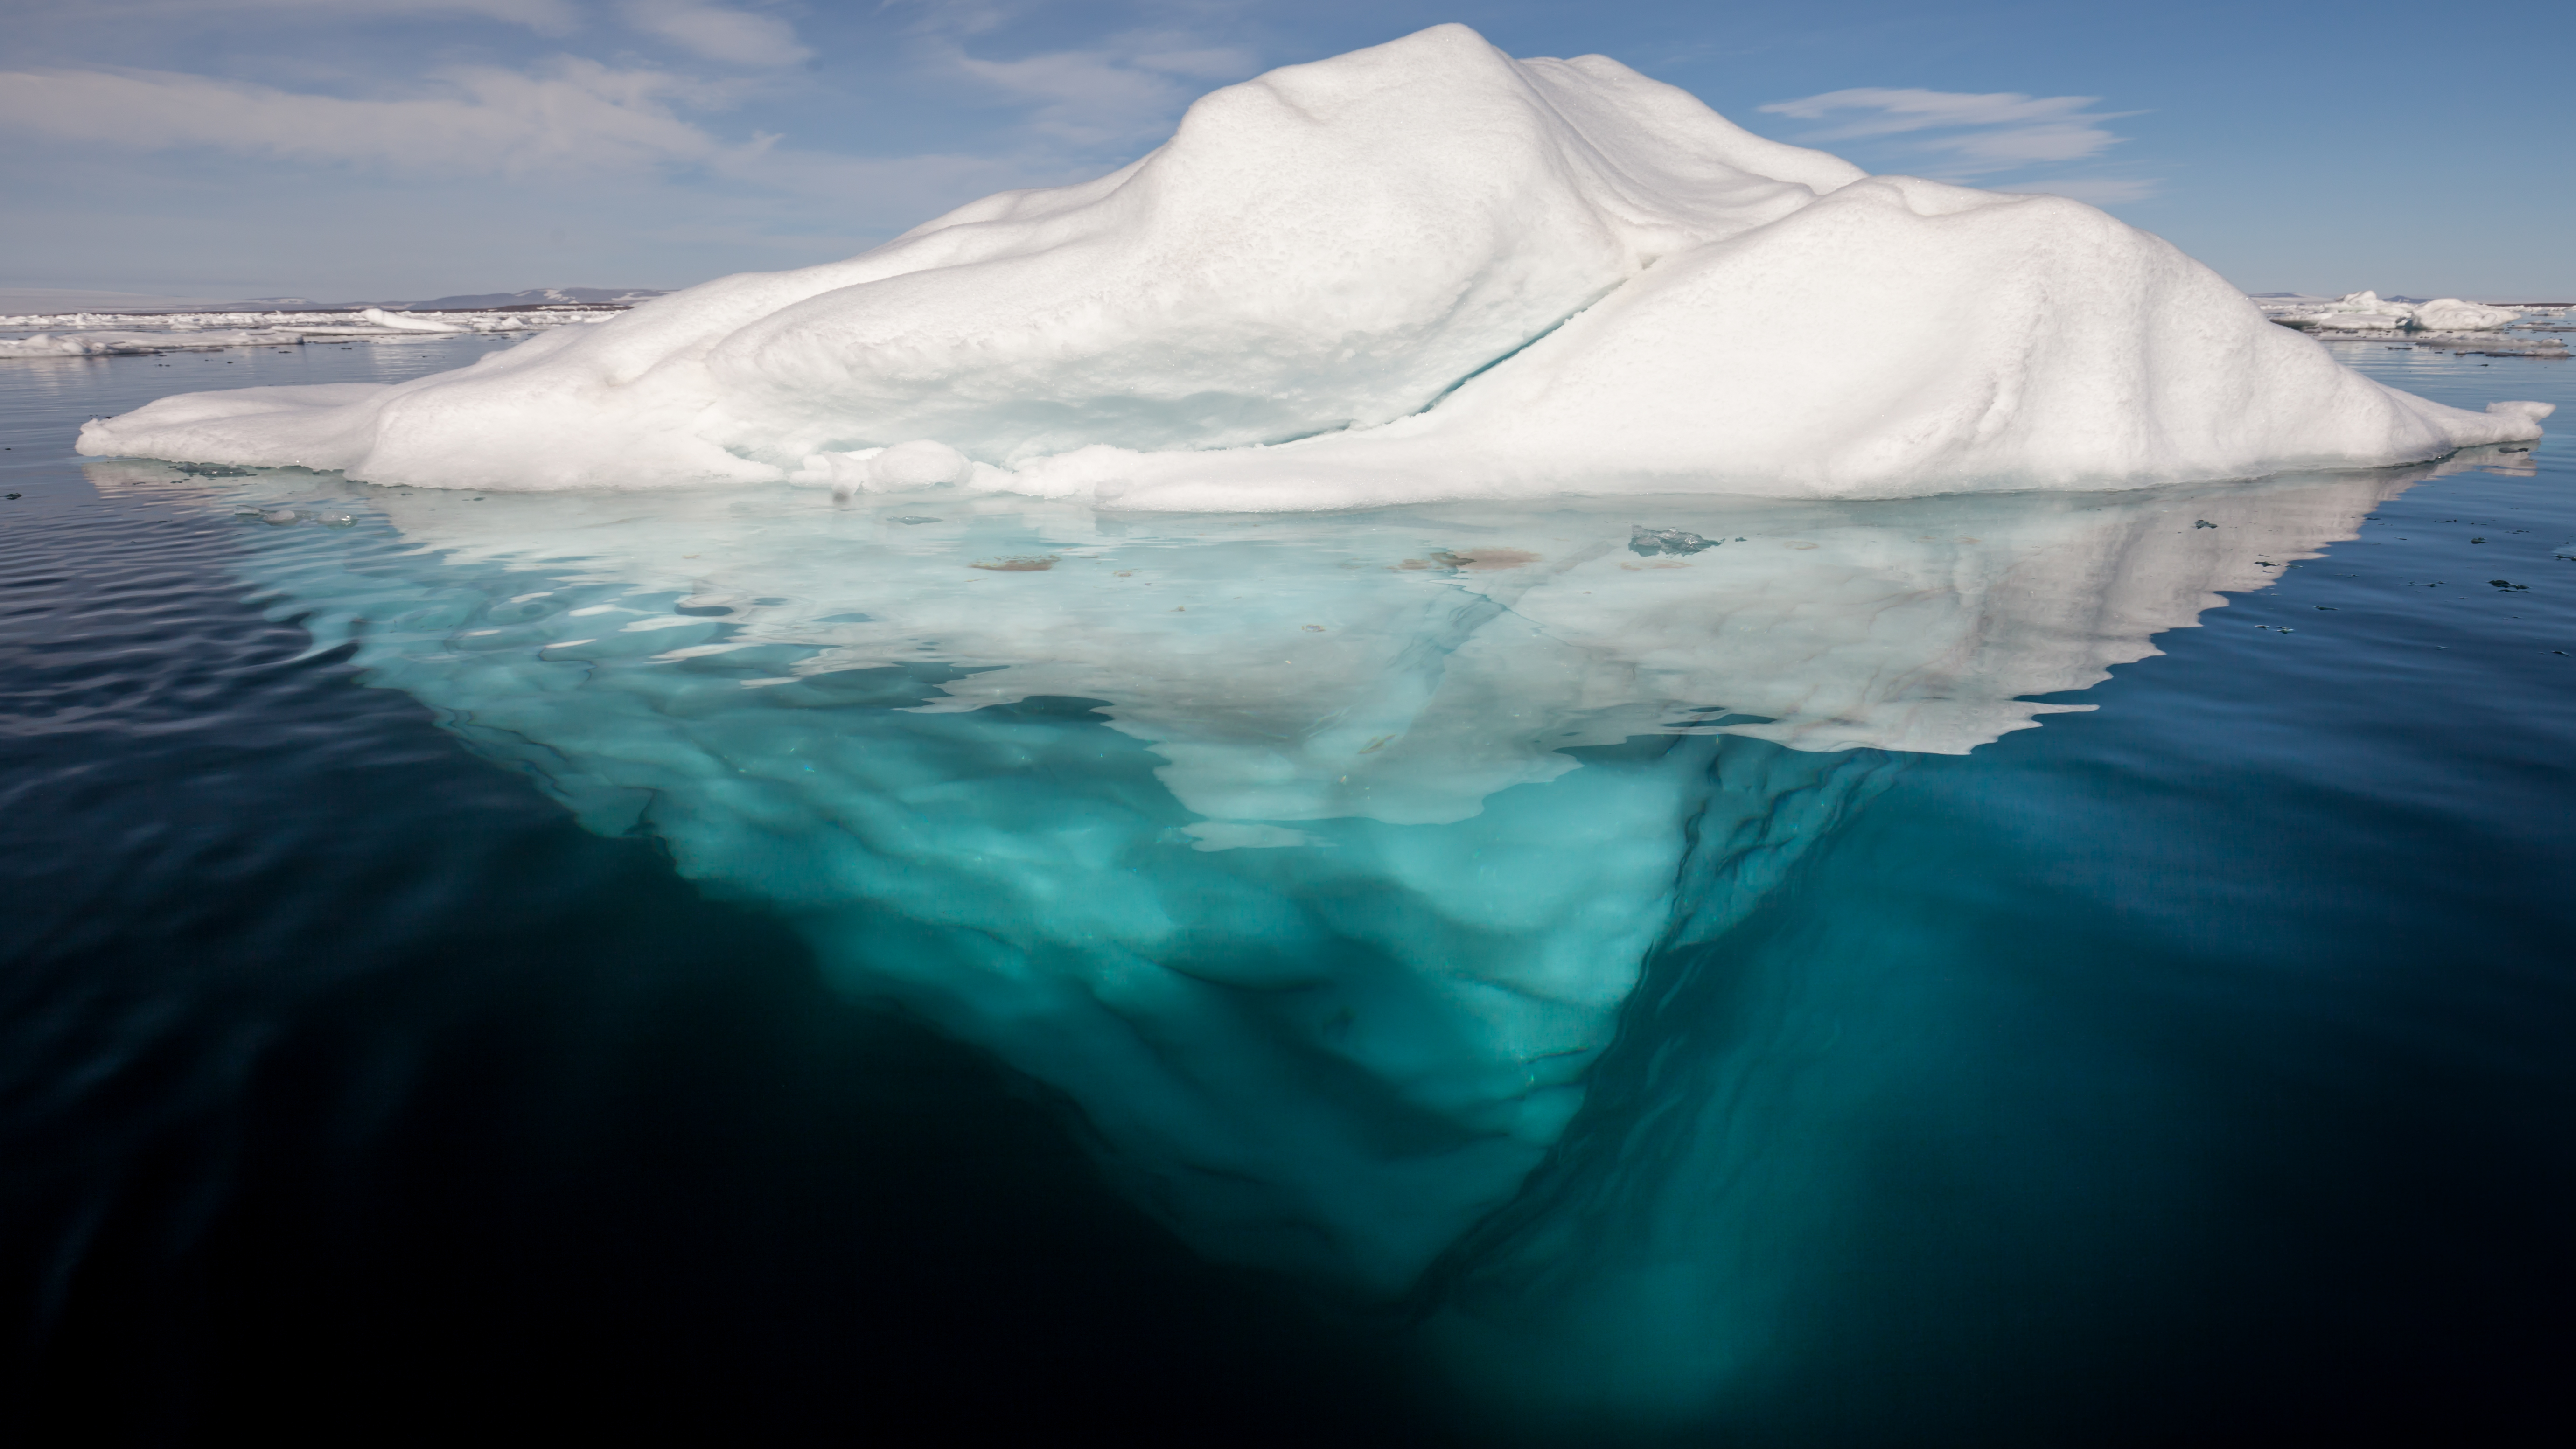 File:Iceberg in the Arctic with its underside exposed, brightened ...